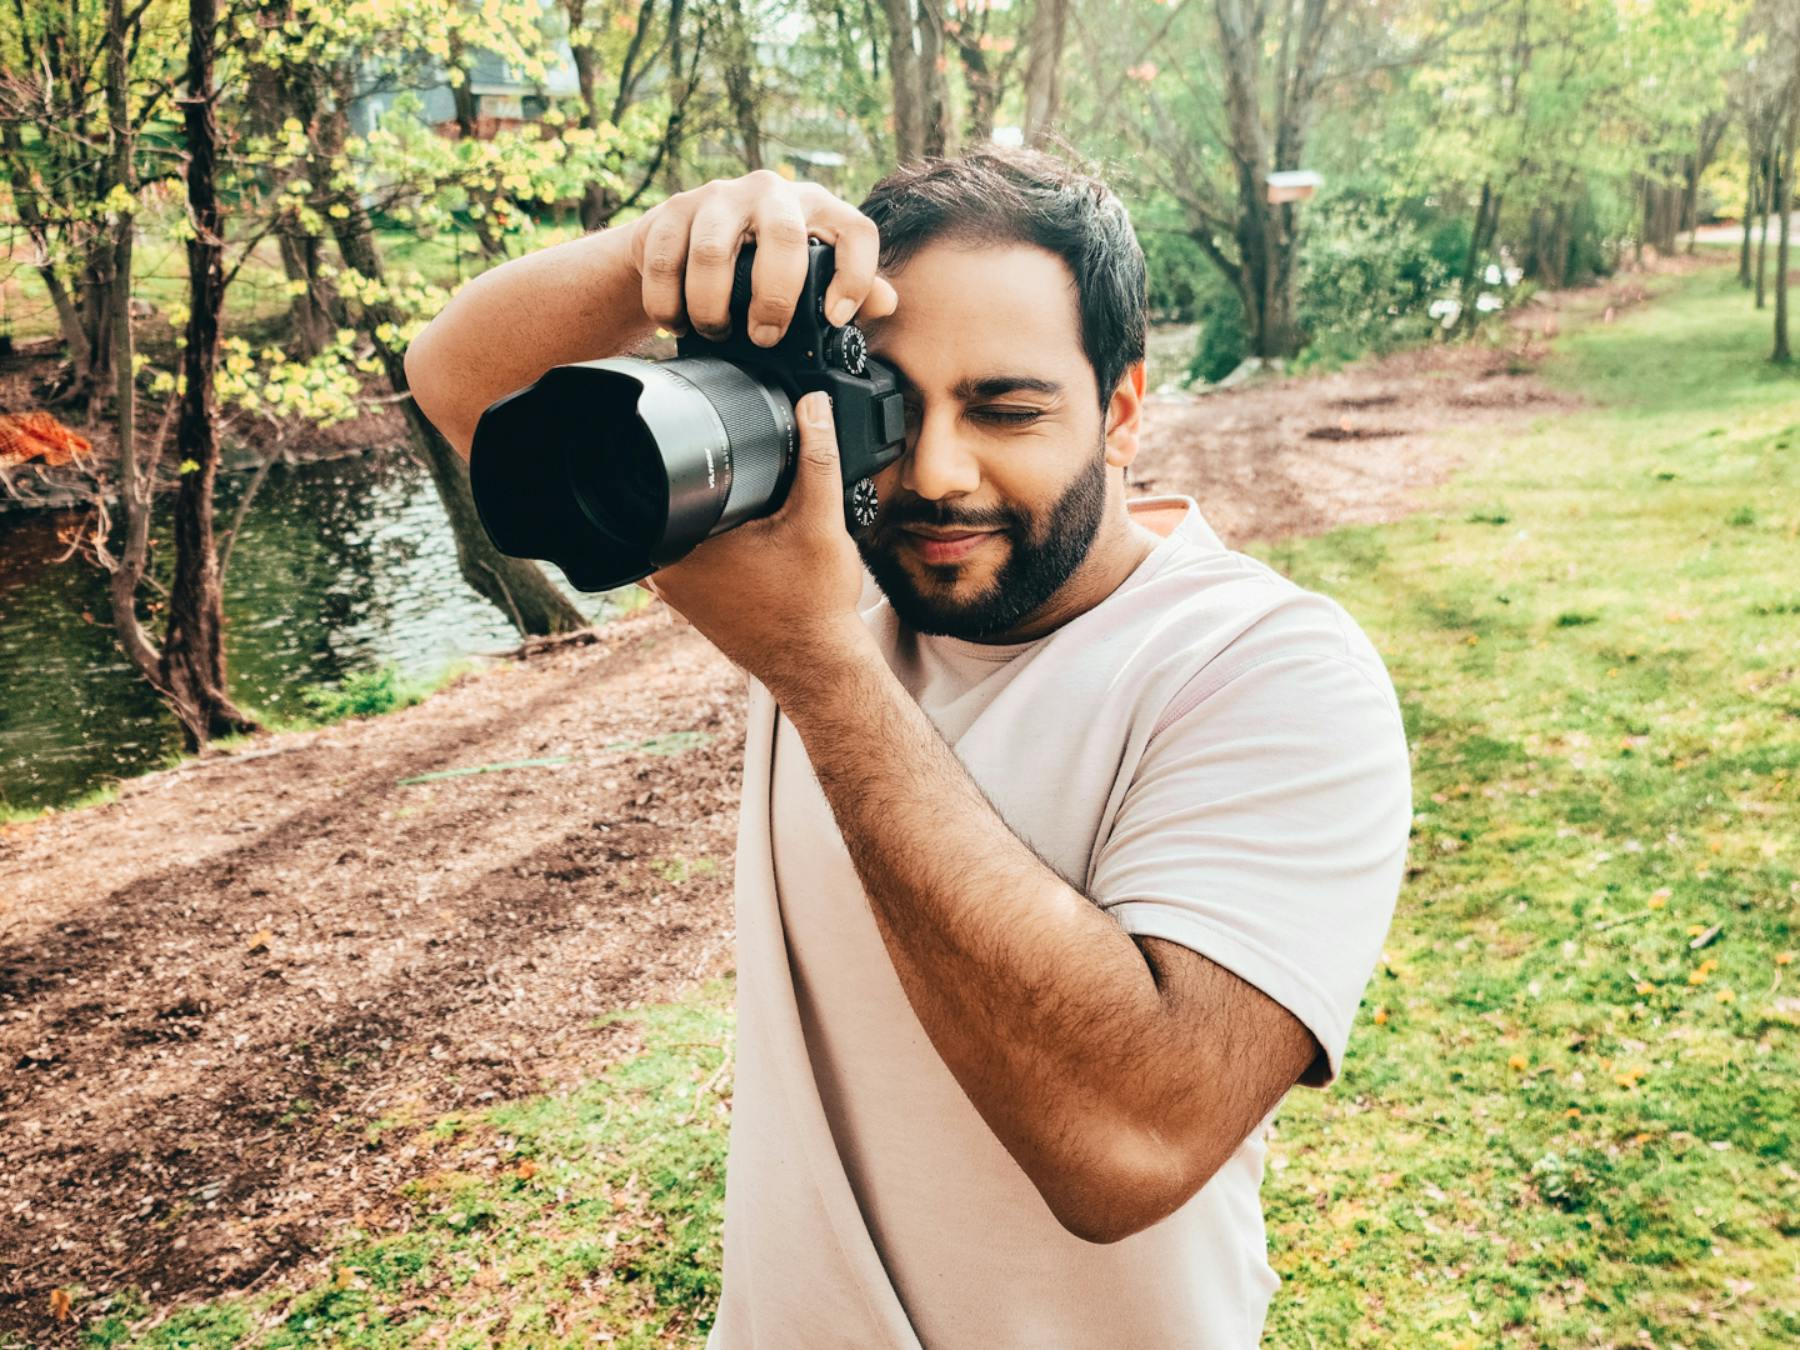 Man taking photos with a DSLR camera outdoors.